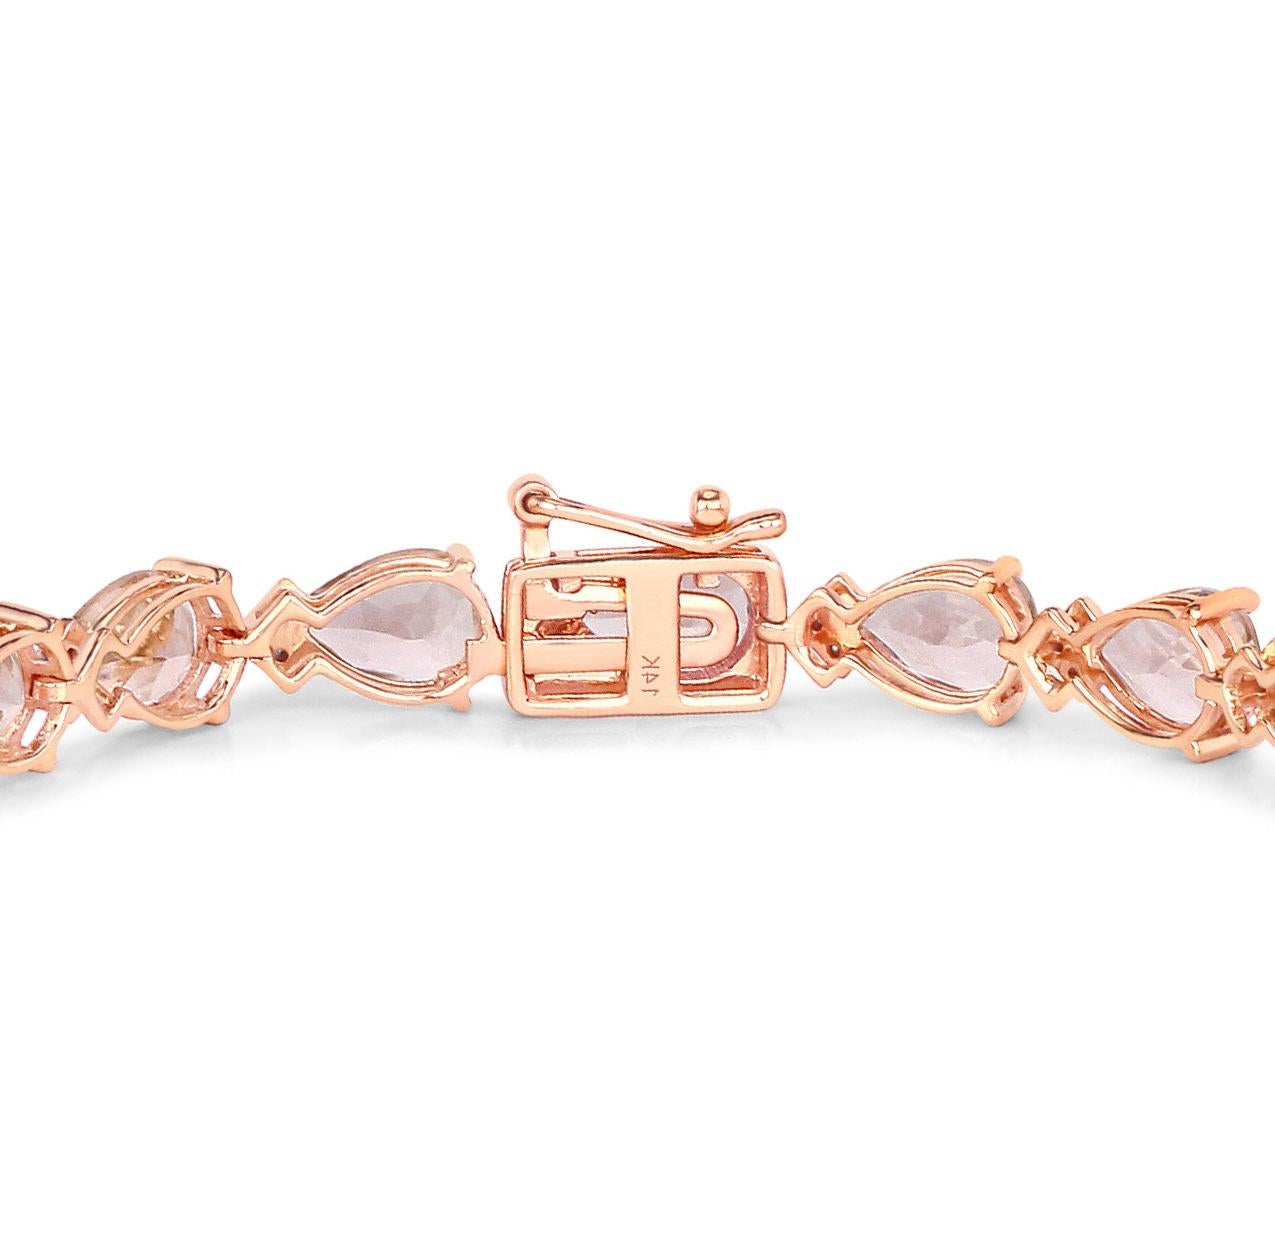 Pink Pear Cut Morganite Tennis Bracelet Diamond Links 11.2 Carats 14K Rose Gold In Excellent Condition For Sale In Laguna Niguel, CA